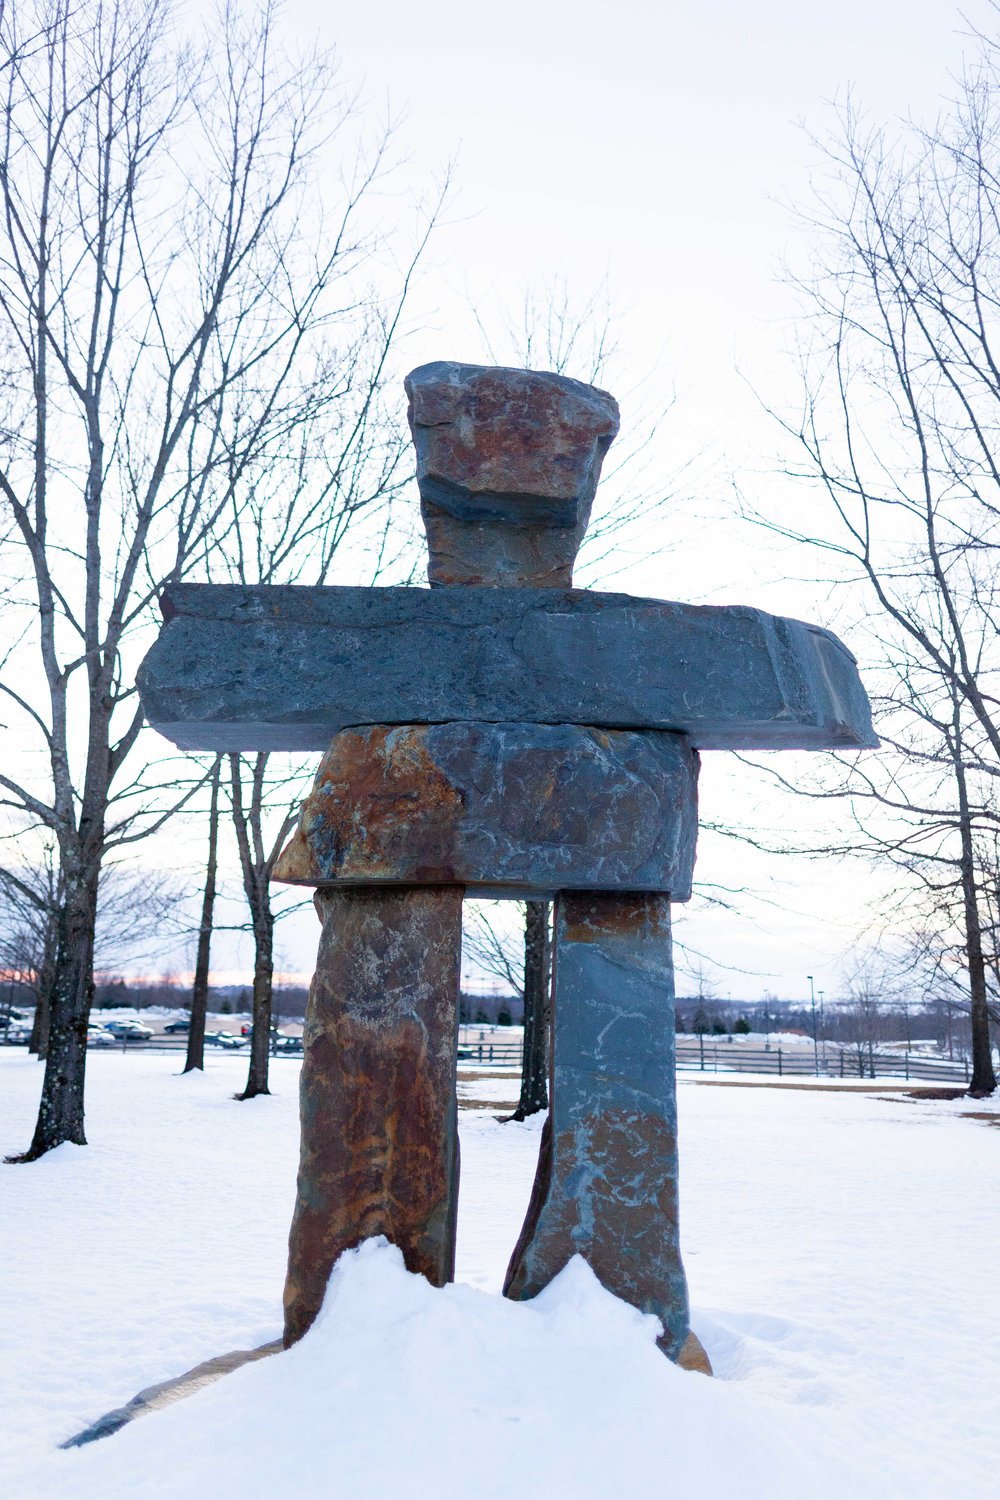 Wayne Holbert’s iNuksuk sculpture is on display. It is a tribute to the indigenous peoples who lived in the Arctic and subarctic regions.